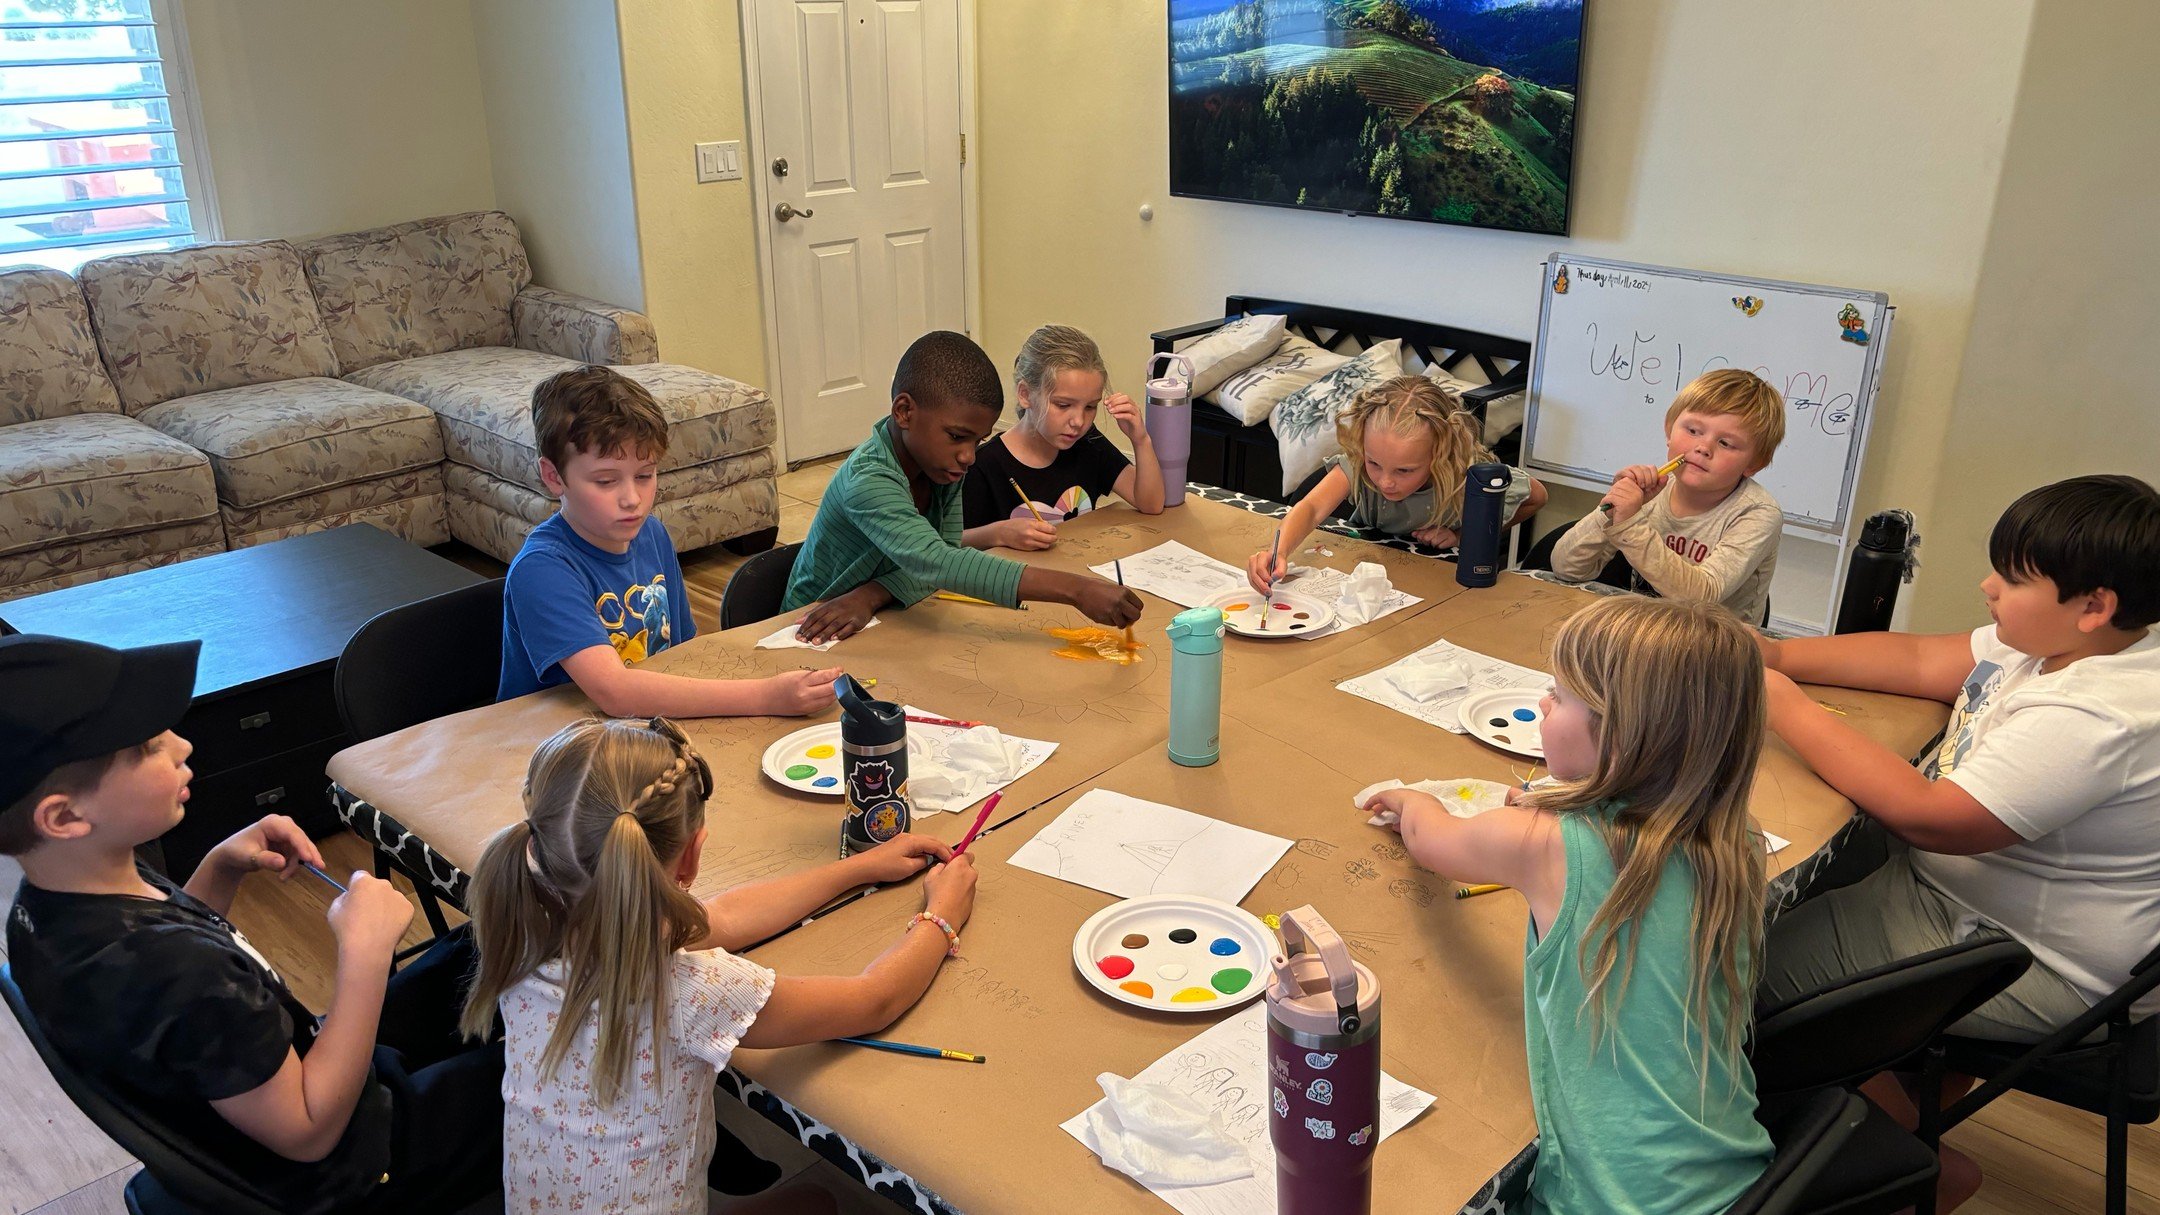 Here's a peek at our weekly artist study and art lesson.

After studying Michaelangelo and &quot;The Creation of the Sun and the Moon&quot; from the Sistine Chapel, our students painted their own characters and celestial objects. Now their masterpiec